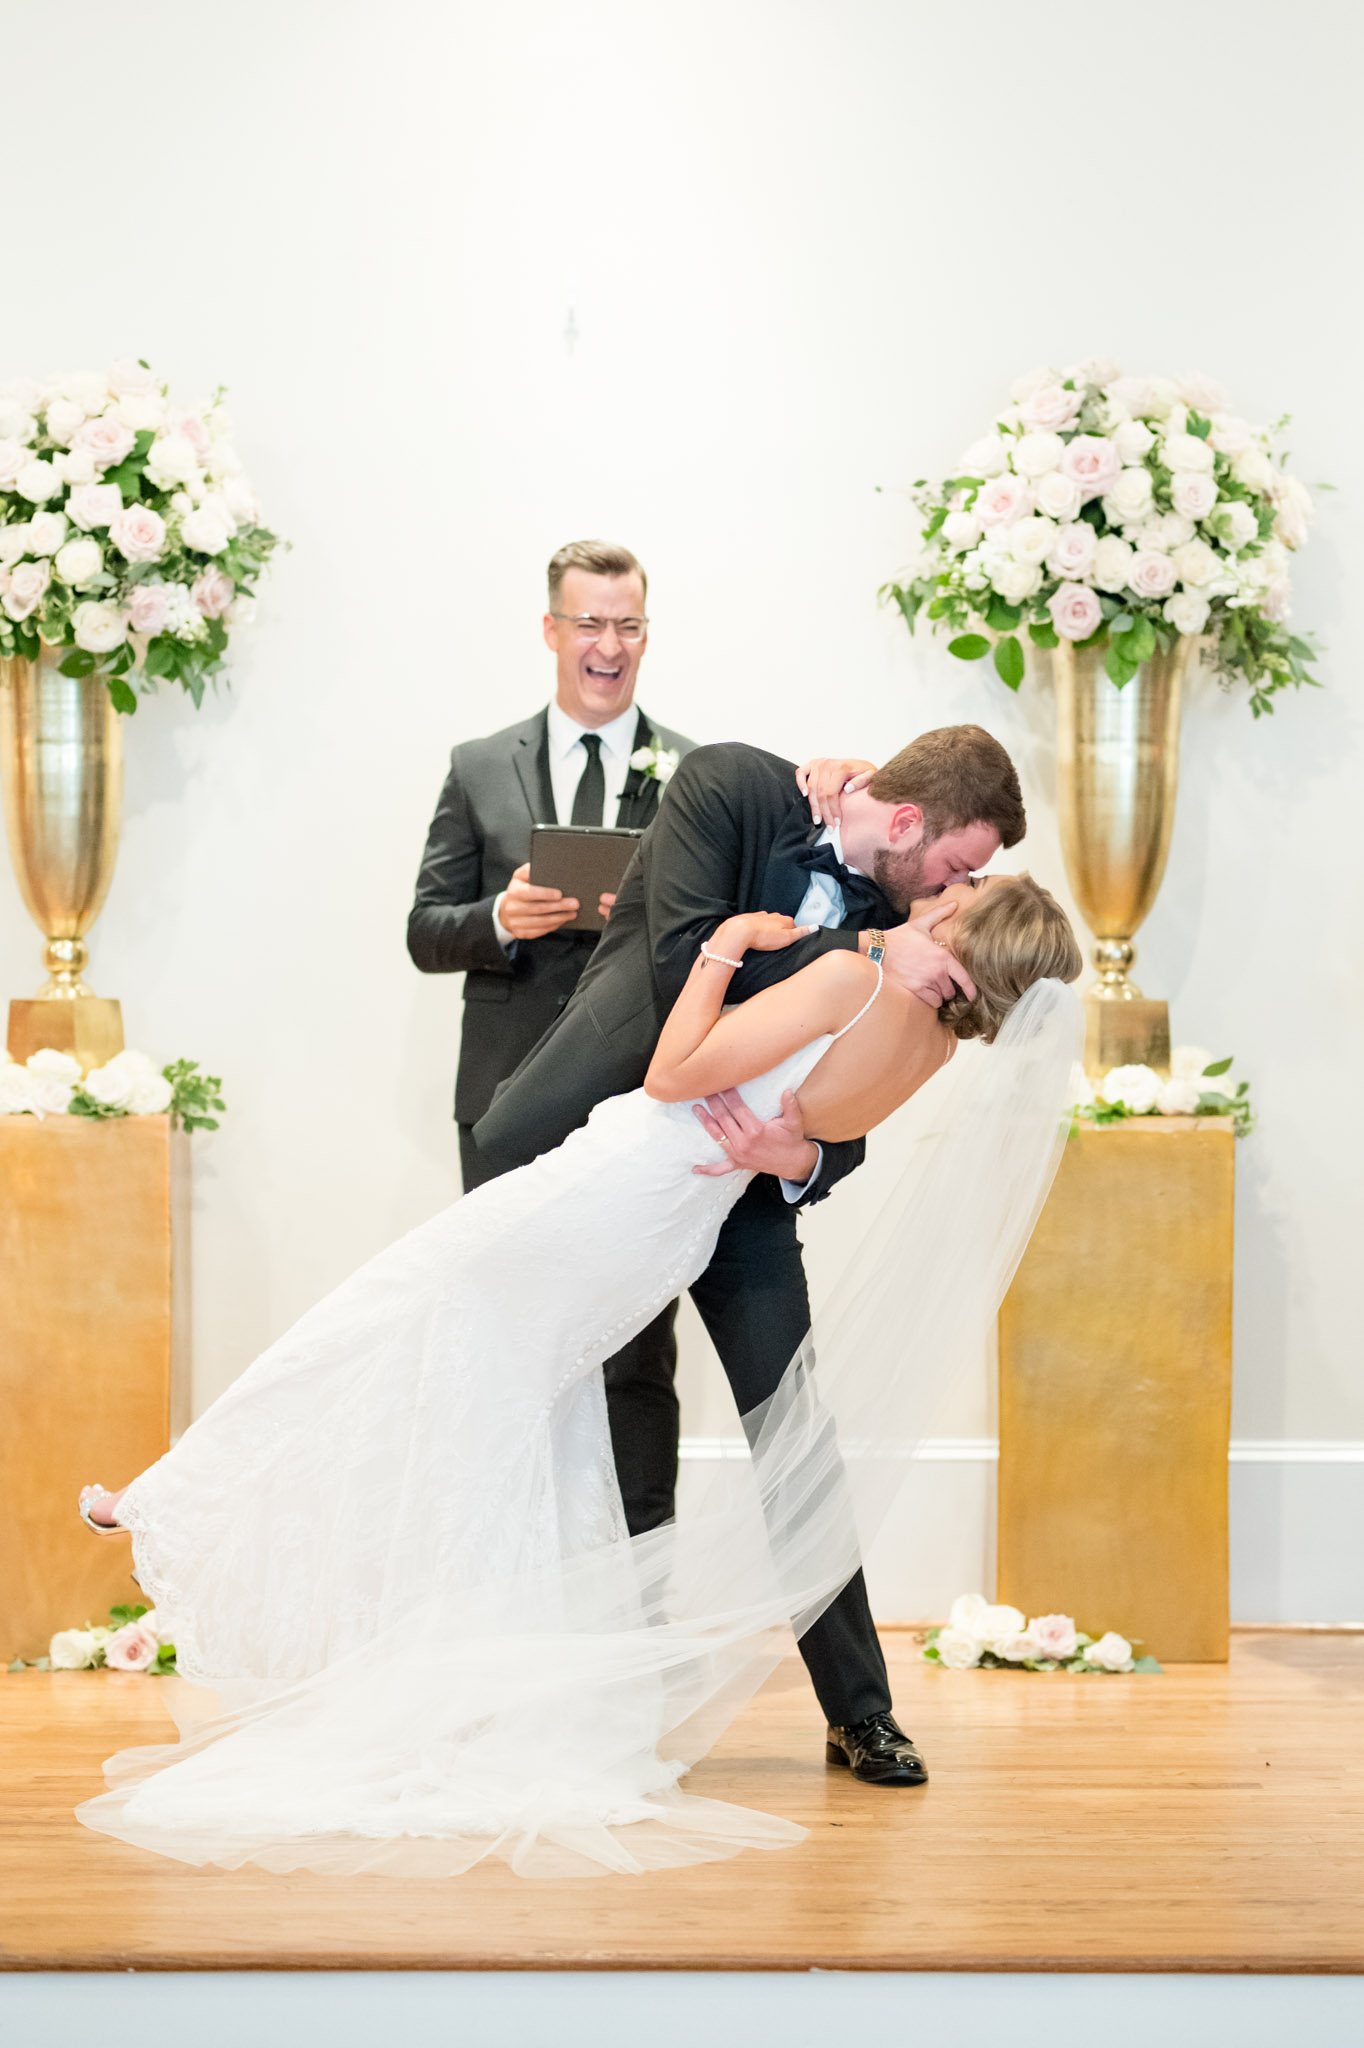 Groom dips bride back for kiss at ceremony.